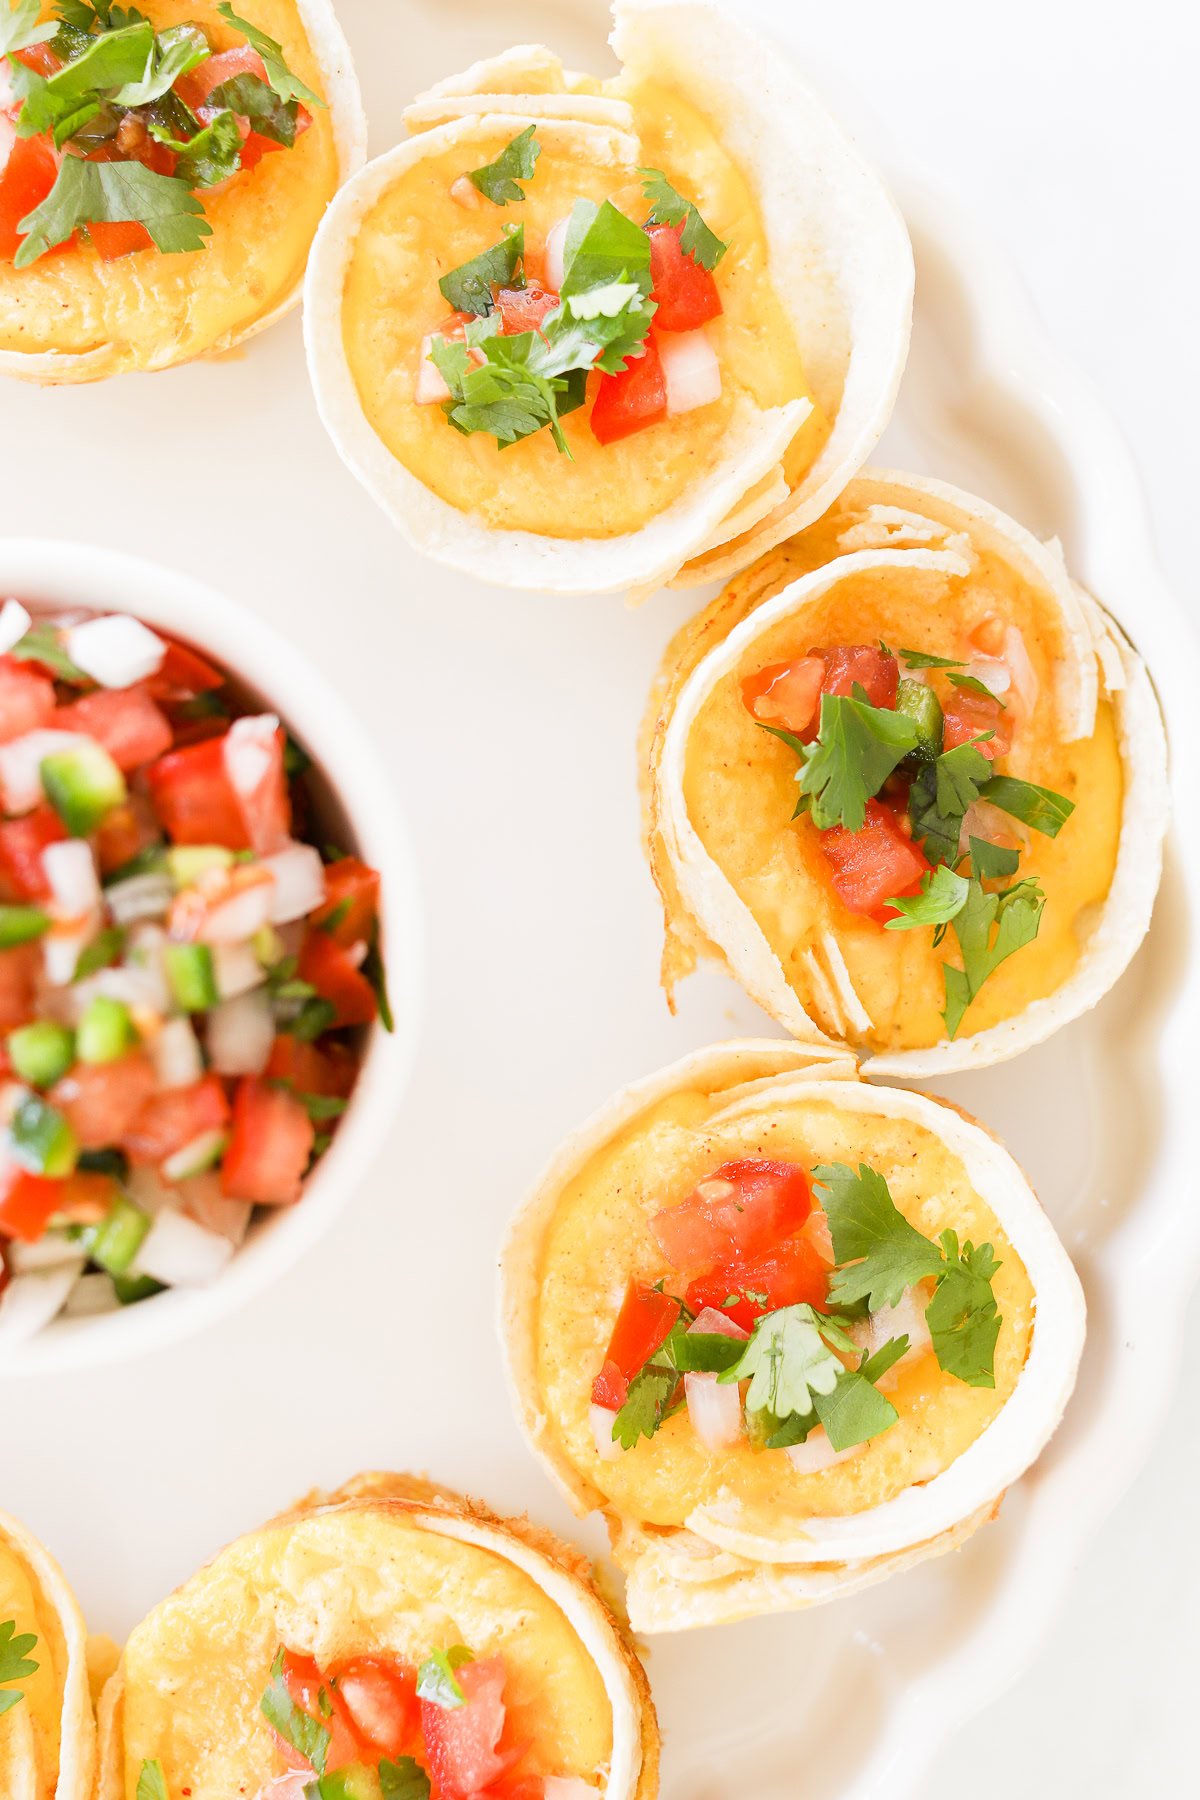 A plate of mini Mexican Breakfast Cups filled with melted cheese, diced tomatoes, onions, and cilantro, arranged in a circle with a small bowl of salsa in the center.